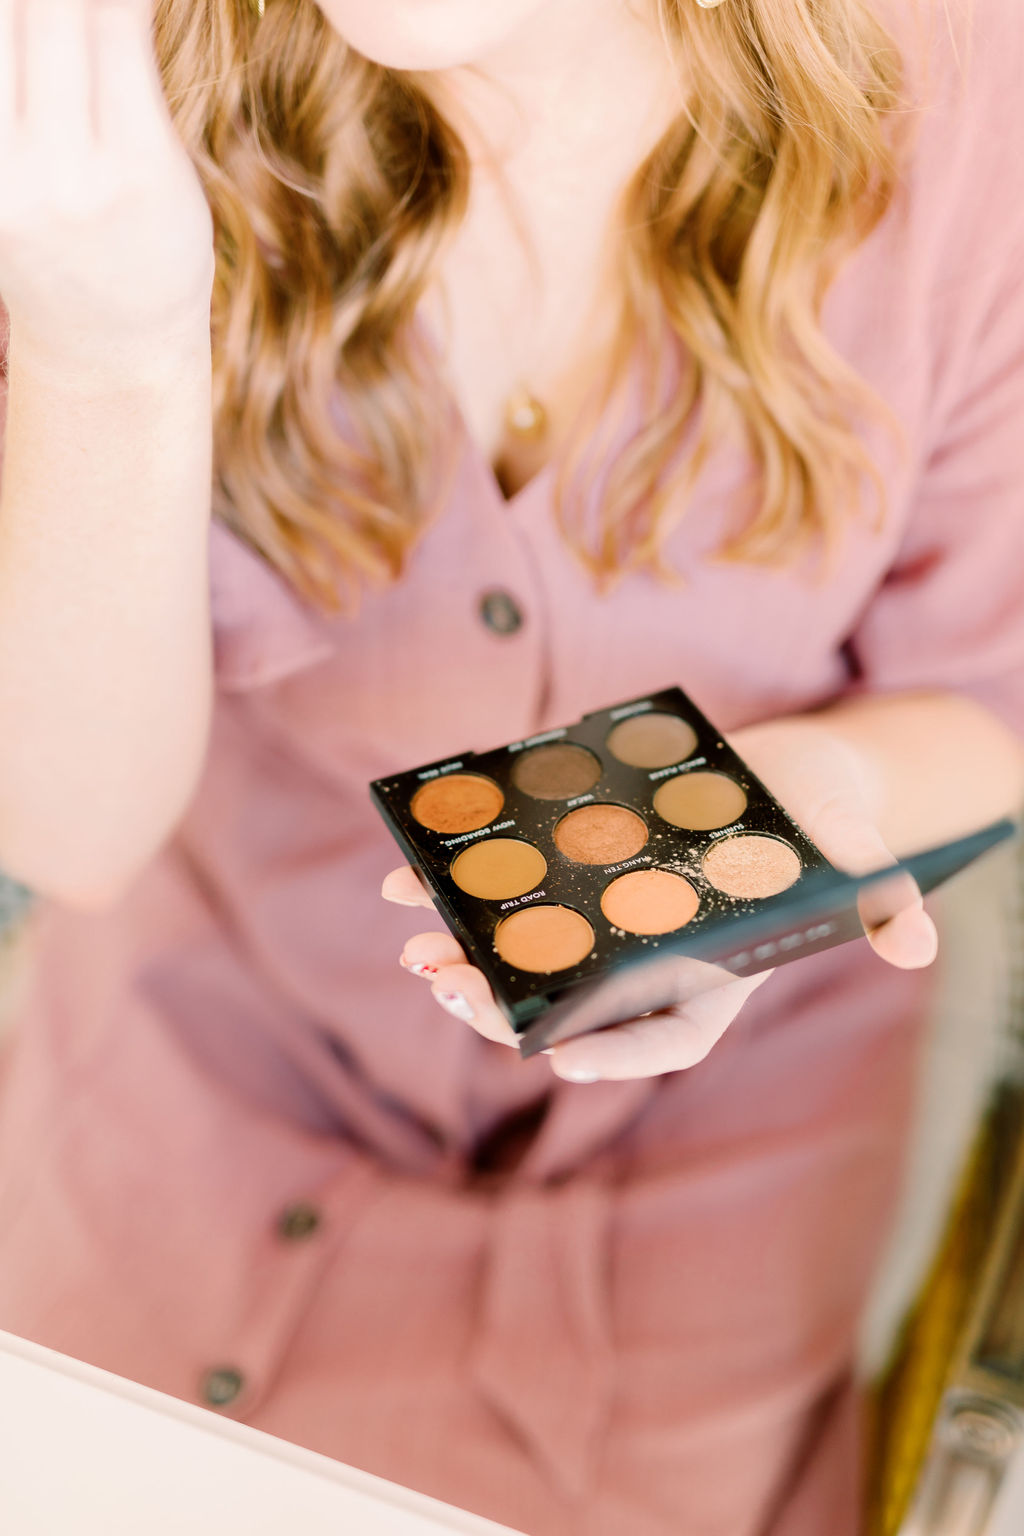 tampa bay blogger amanda burrows is using the morphe palette from ulta